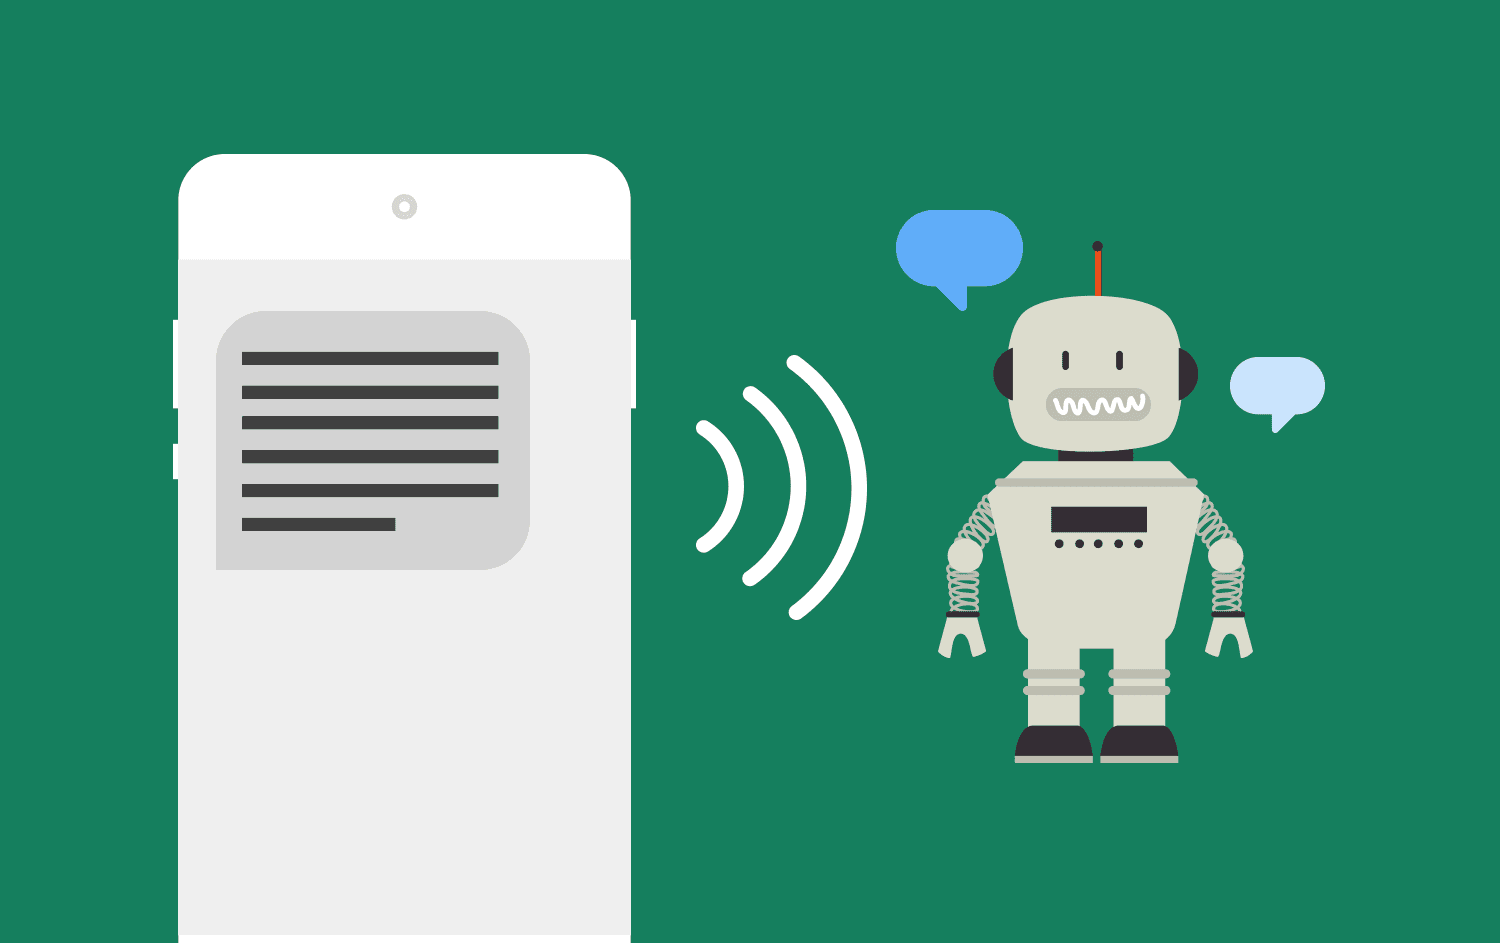 Cartoon representation of a robot speaking content from a text message